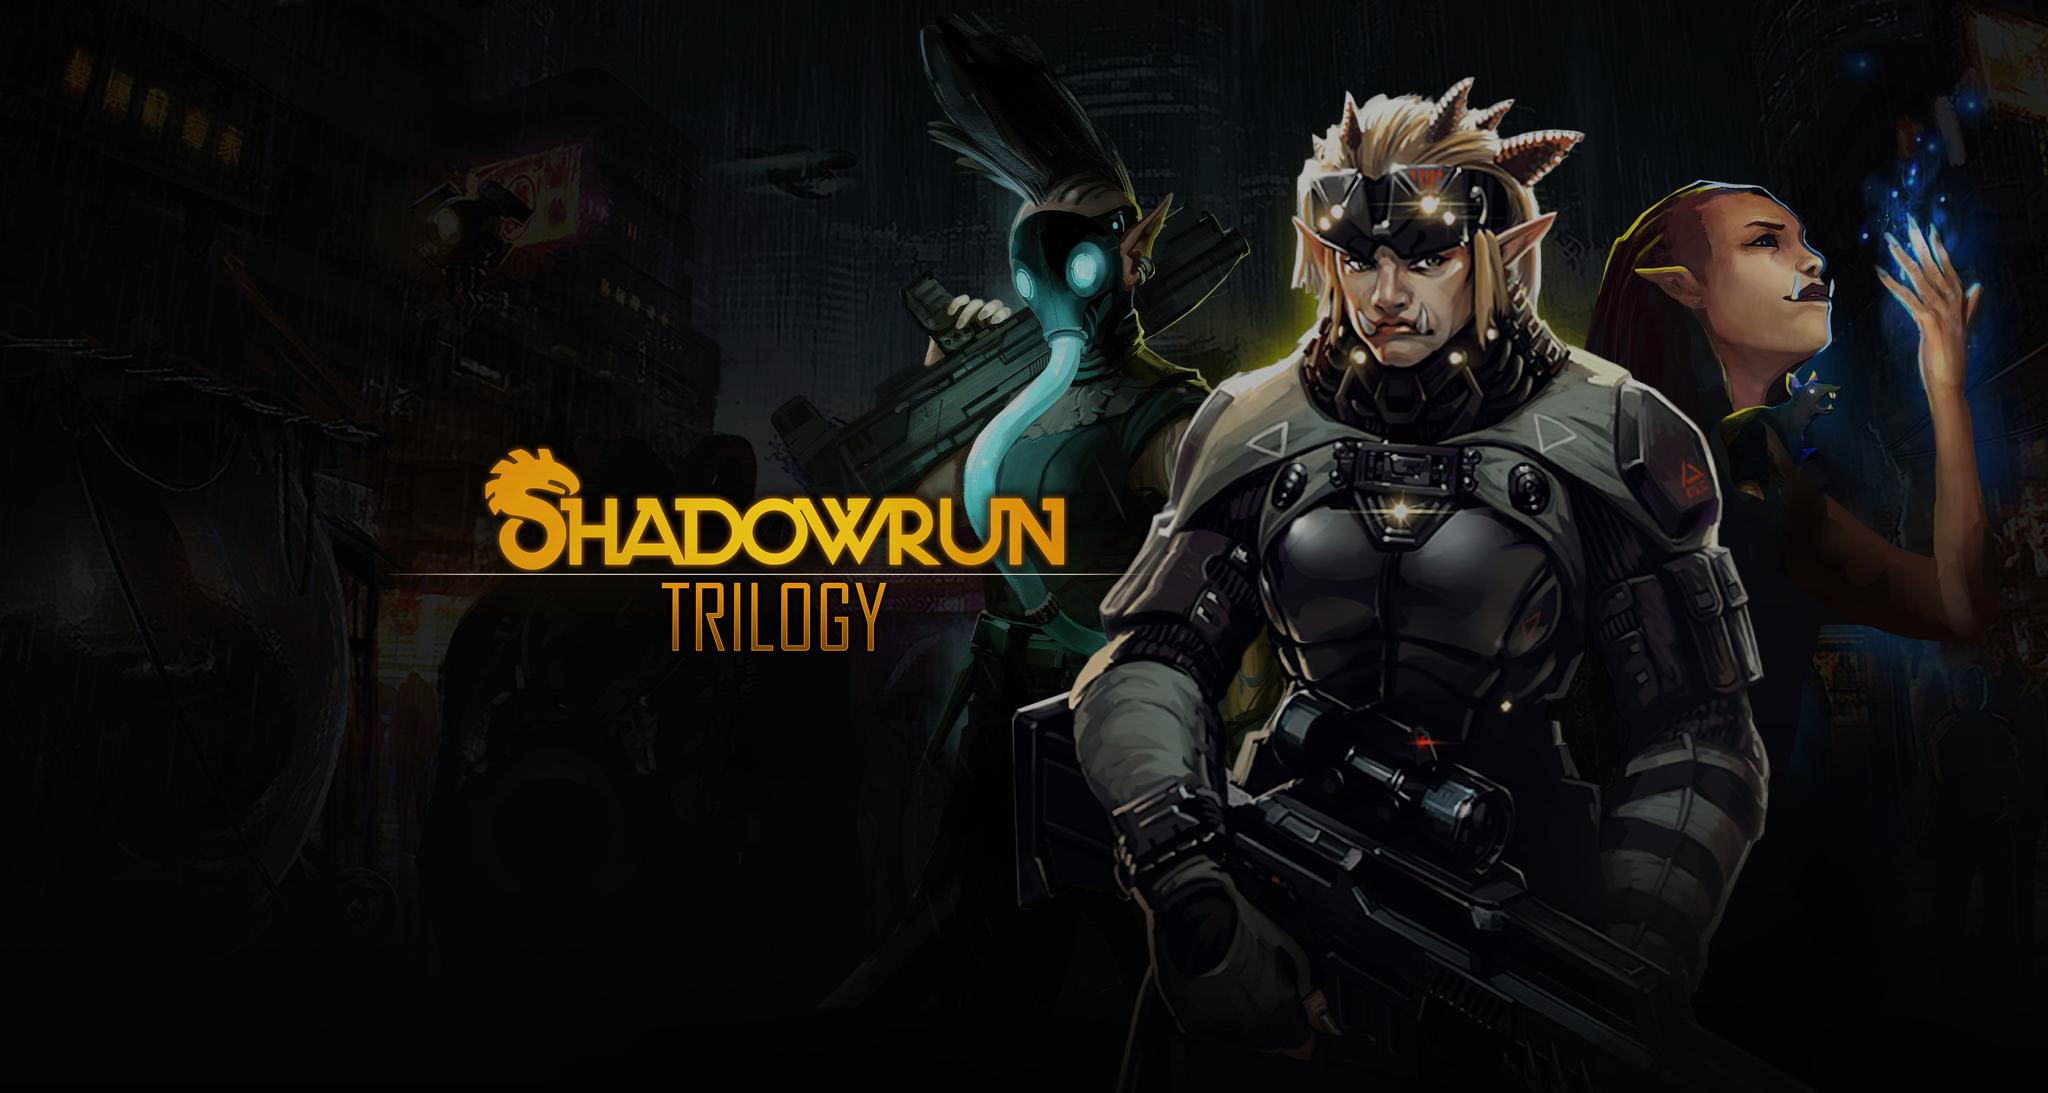 Shadowrun Trilogy is coming to consoles in June 2022